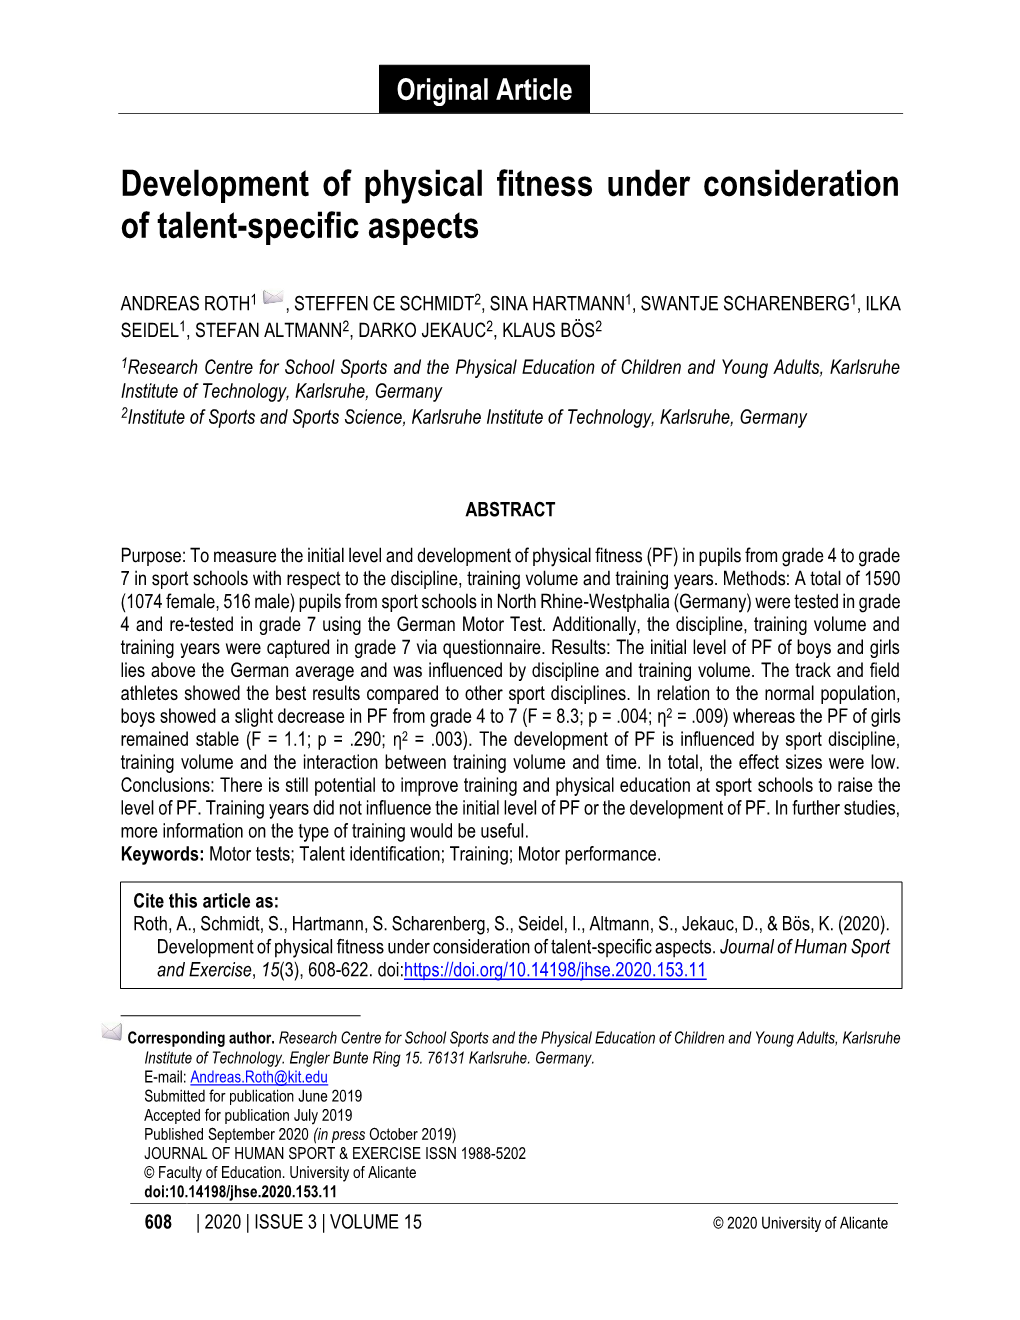 Development of Physical Fitness Under Consideration of Talent-Specific Aspects